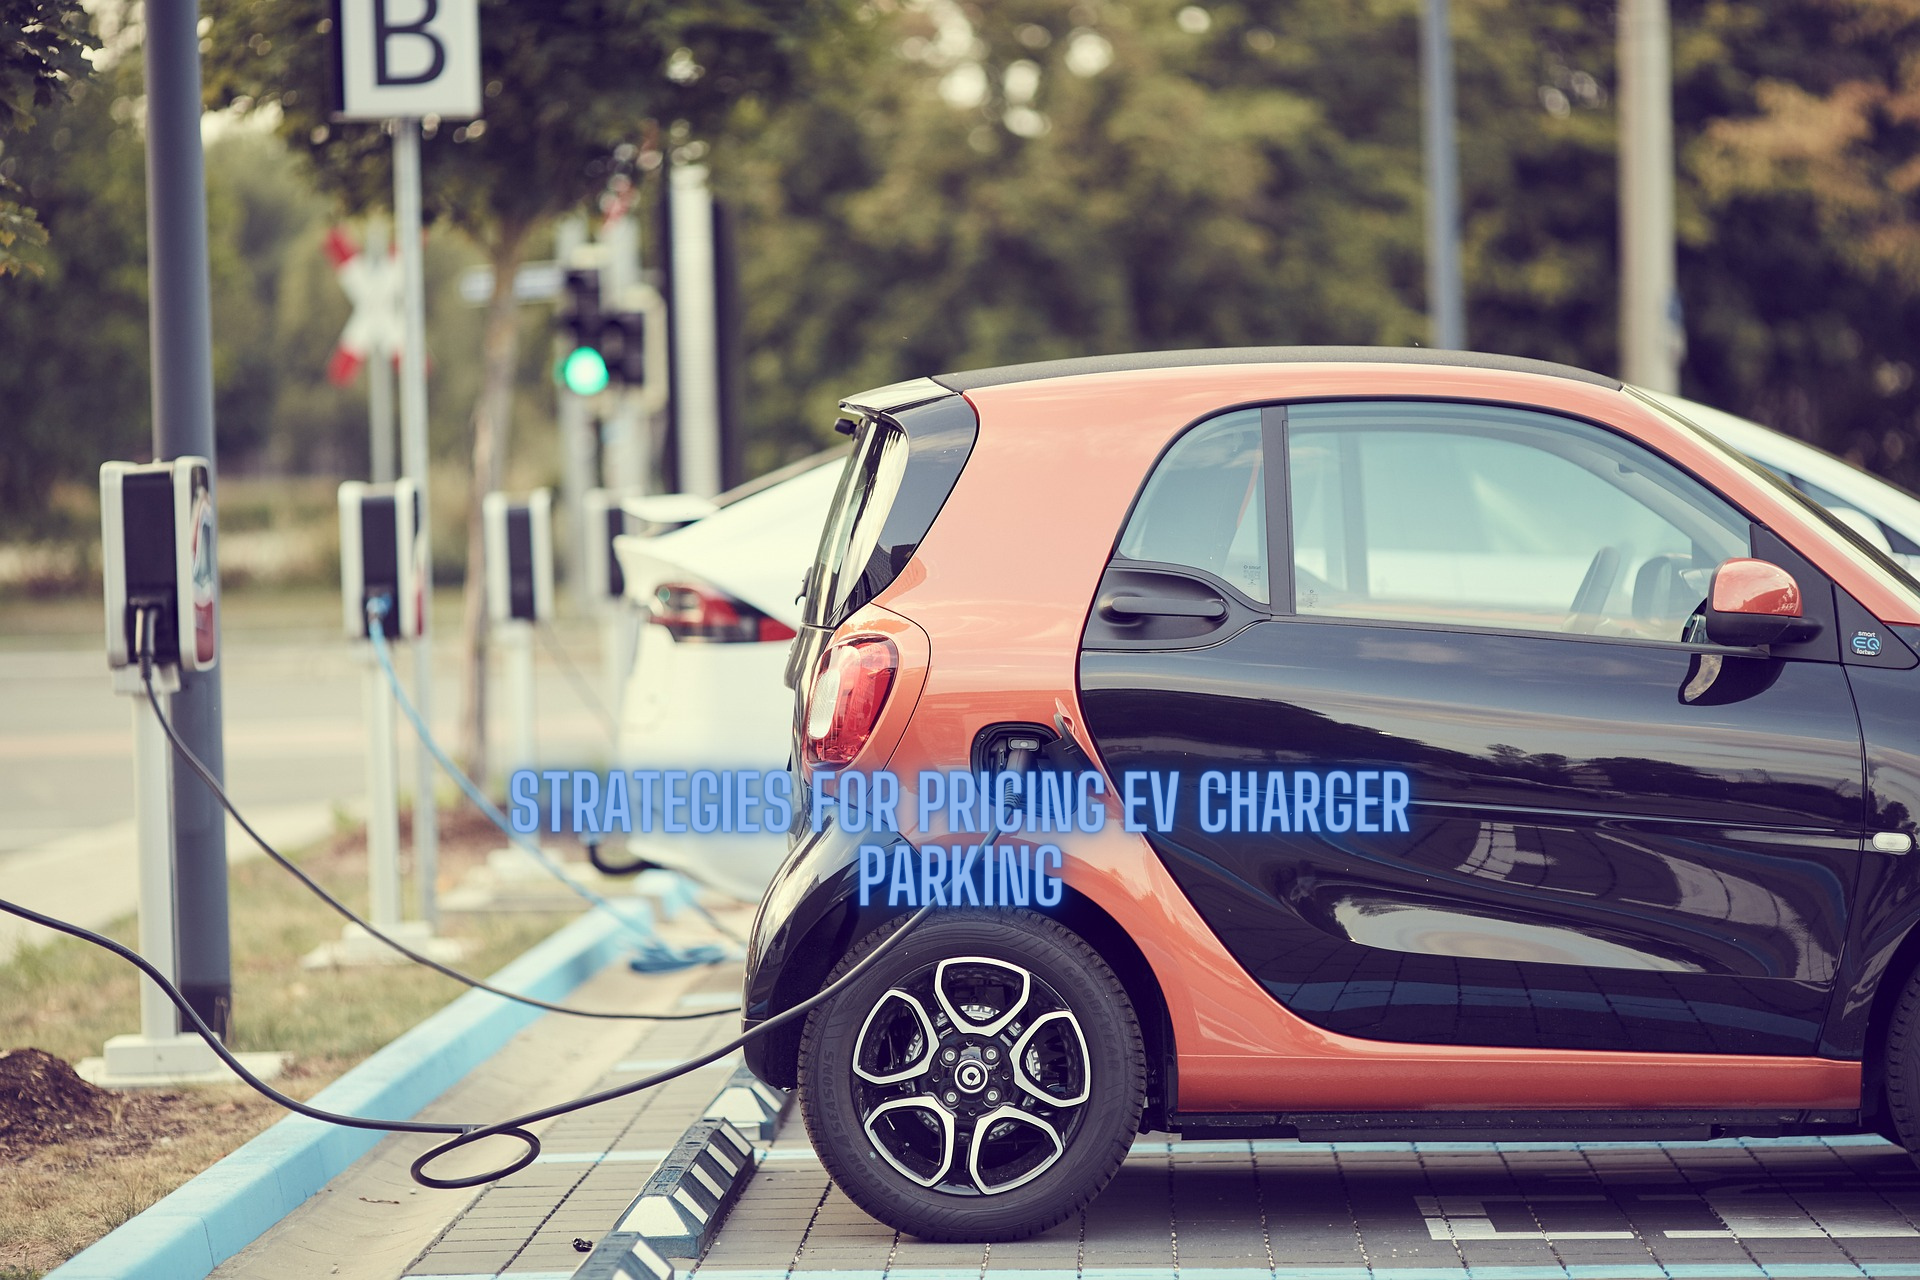 Strategies for Pricing EV Charger Parking